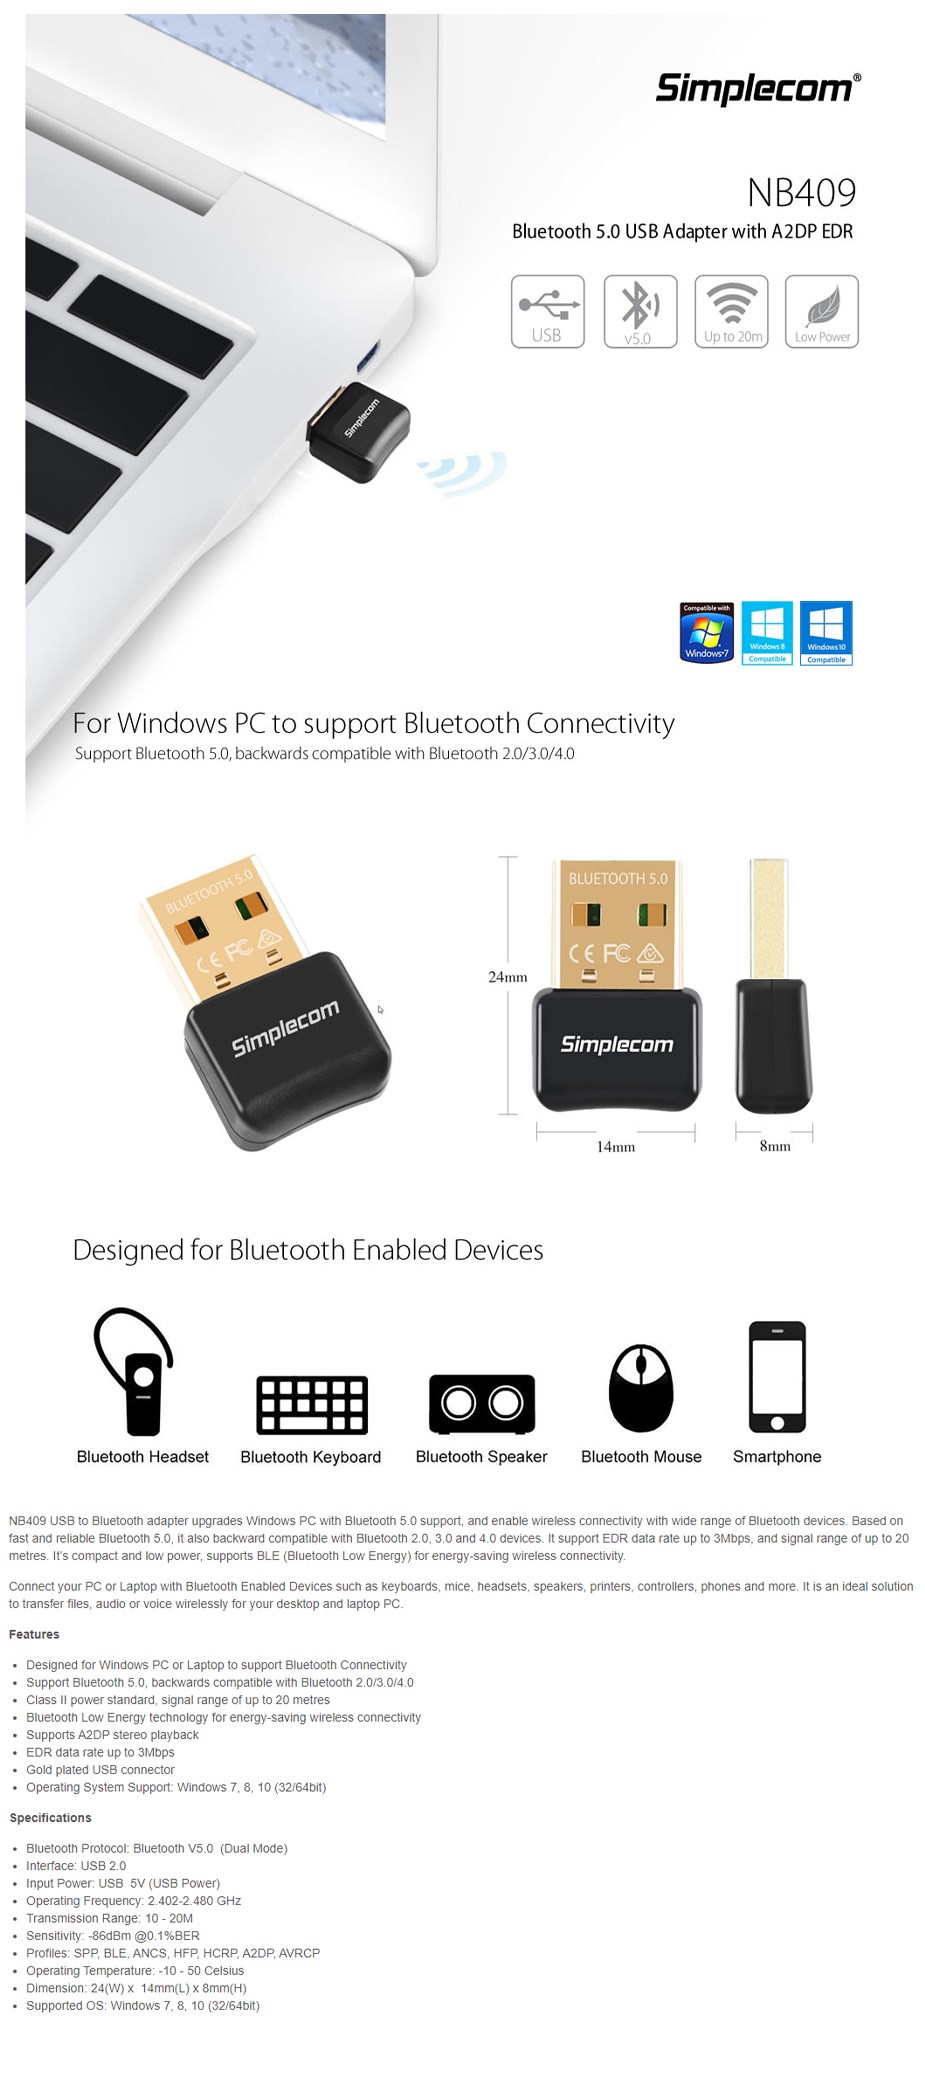 A large marketing image providing additional information about the product Simplecom NB409 Bluetooth 5.0 USB Wireless Dongle with A2DP EDR - Additional alt info not provided